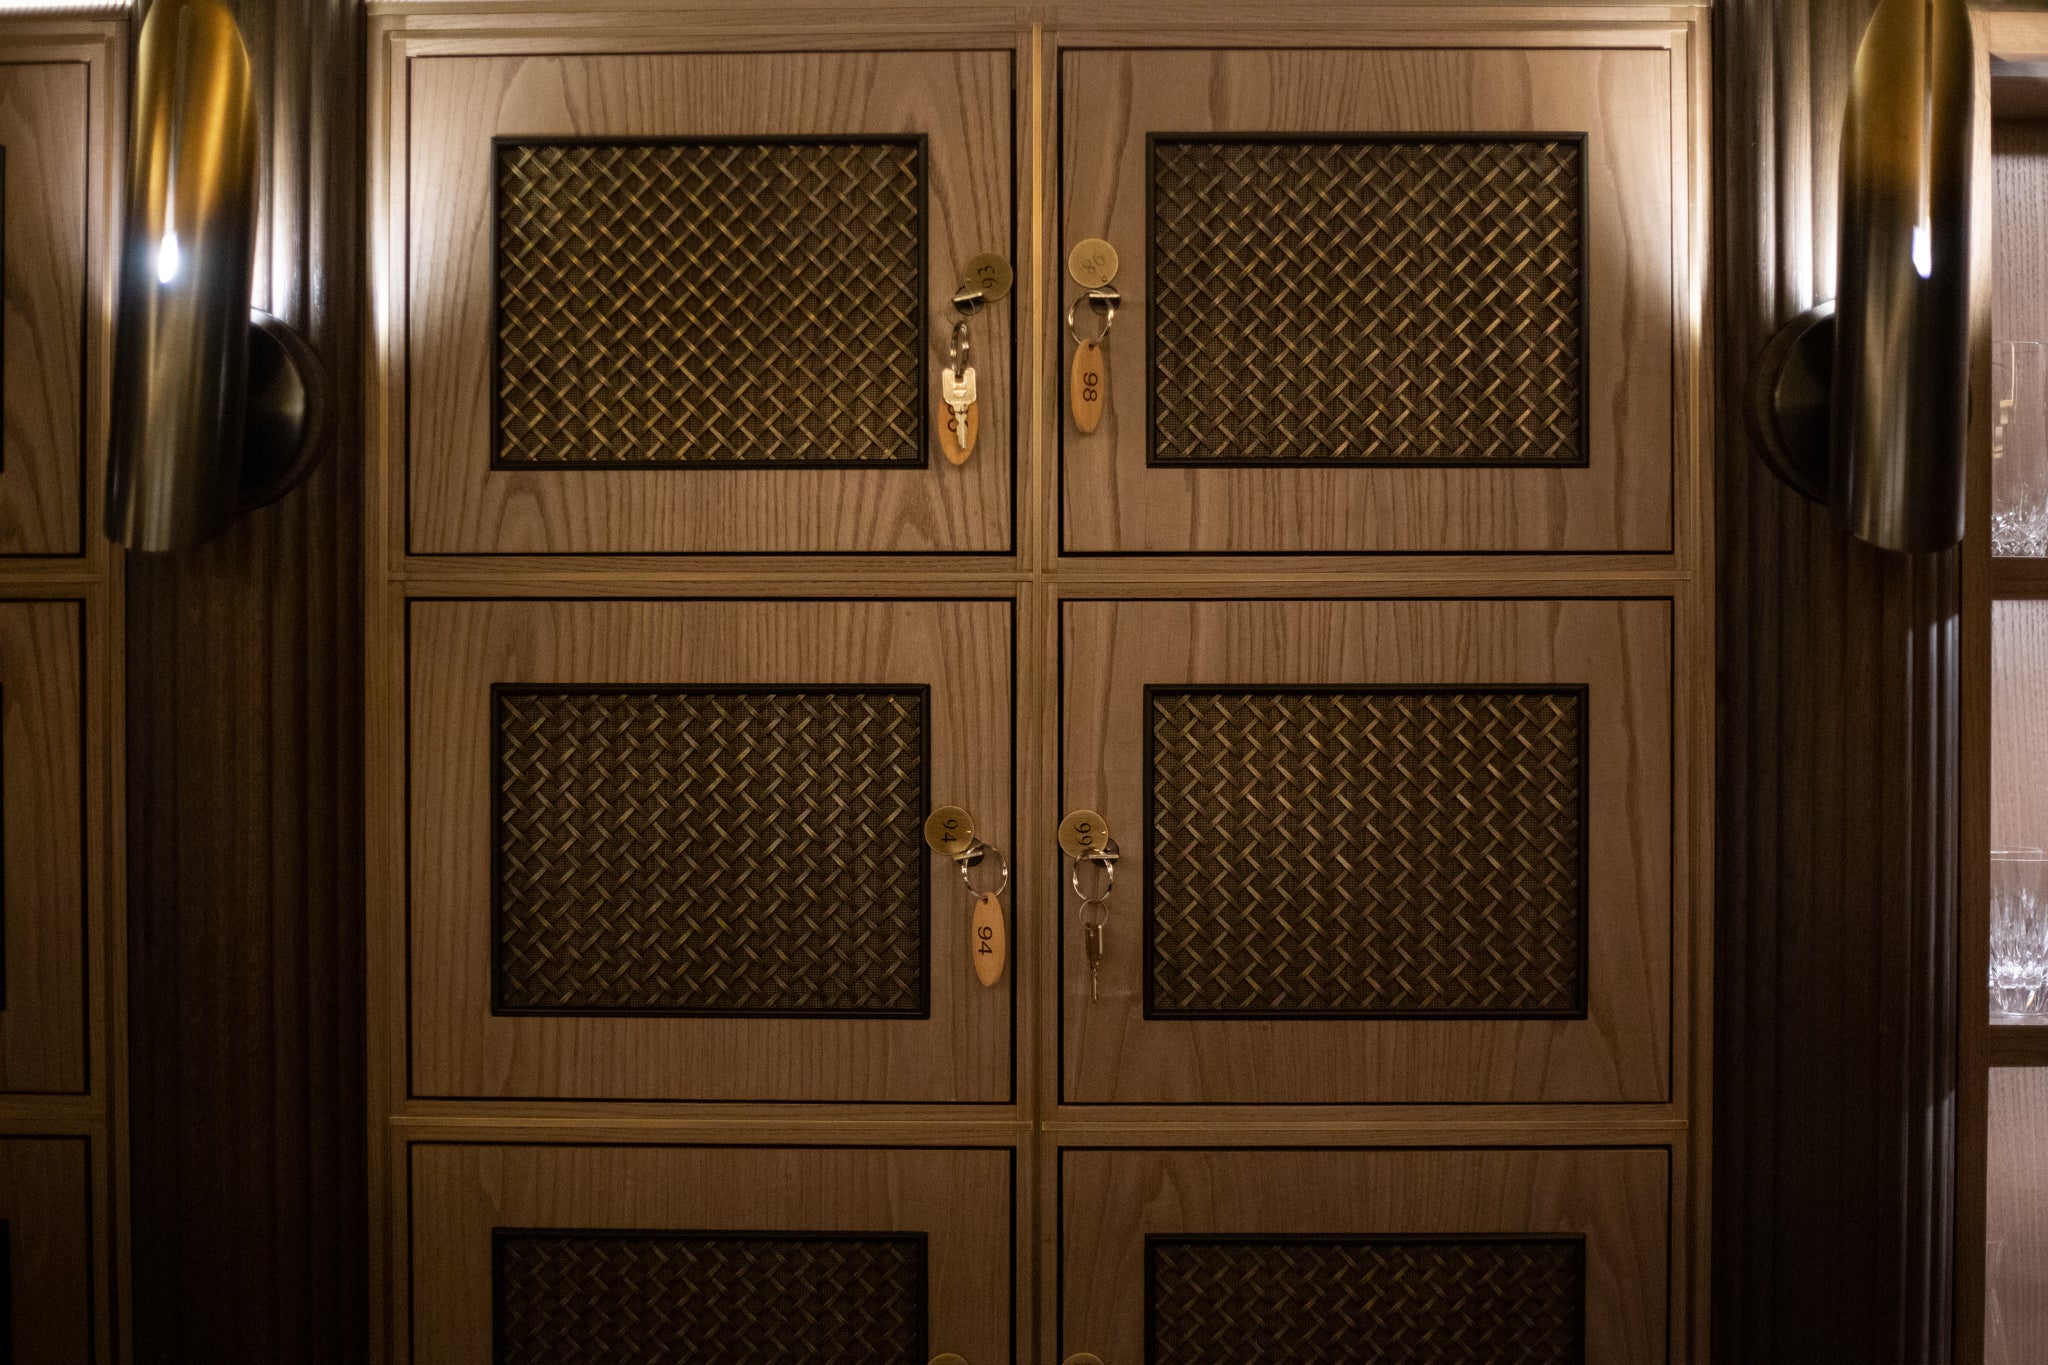 The lockers at Oscuro cigar lounge, perfect for storing cigars and spirits.